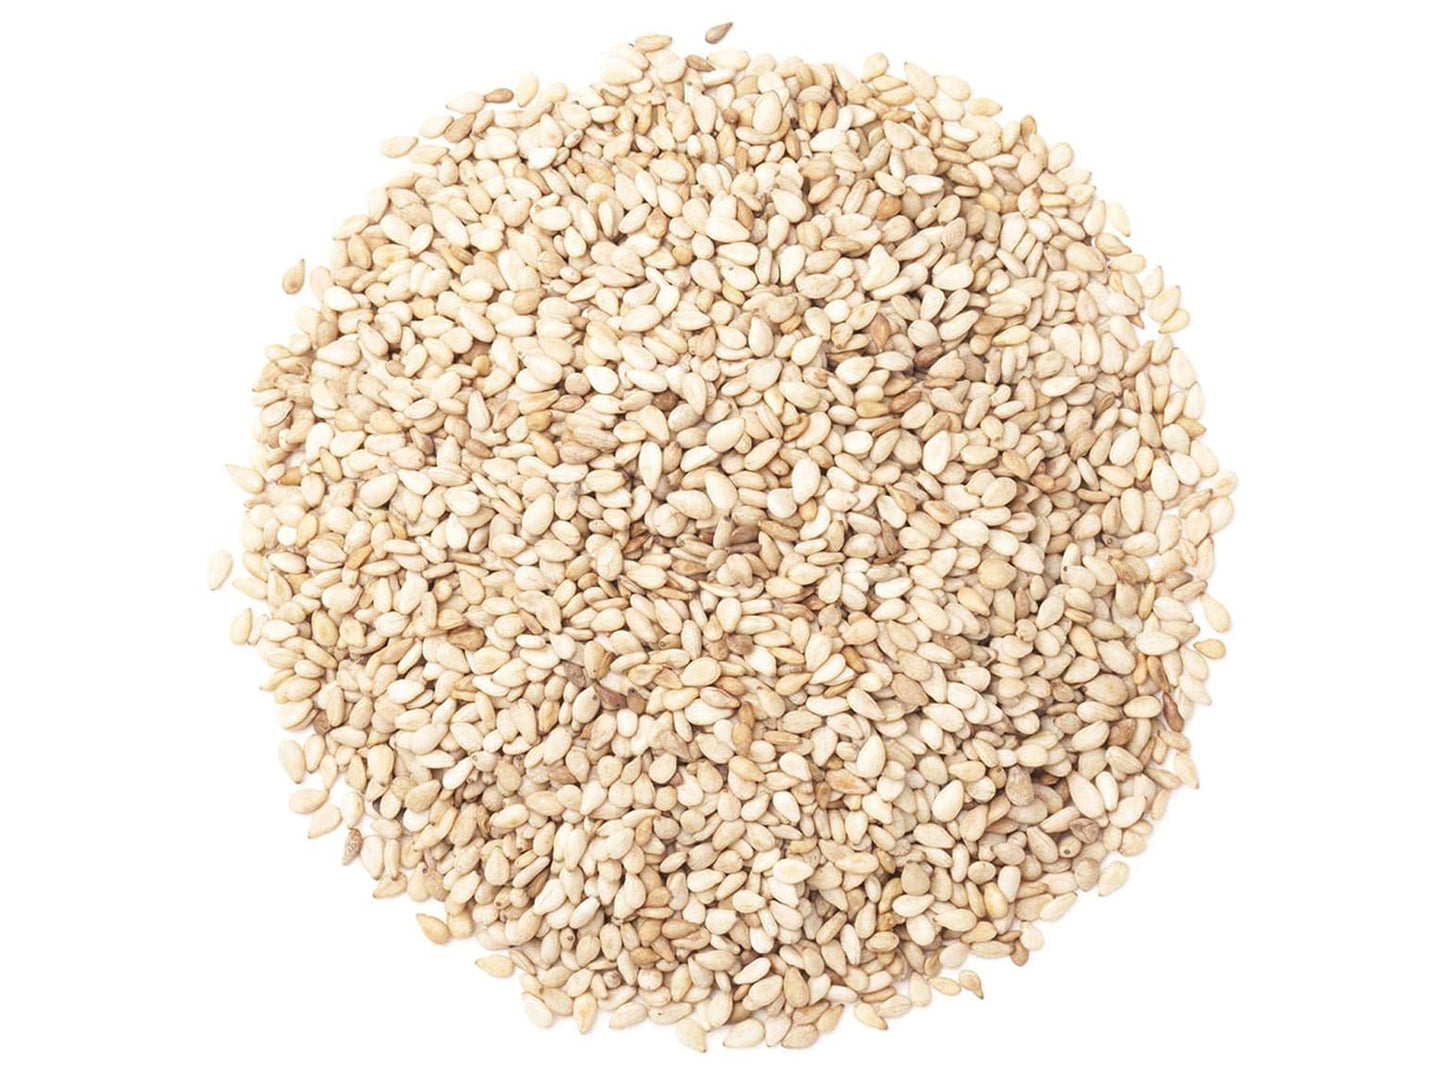 Hulled Sesame Seeds — Non-GMO Verified, Whole Raw White Sesame Seeds, Kosher and Vegan, Unroasted, Bulk. High in Magnesium, Iron, and Calcium. Perfect for Tahini Paste, for Sprinkling Baked Goods